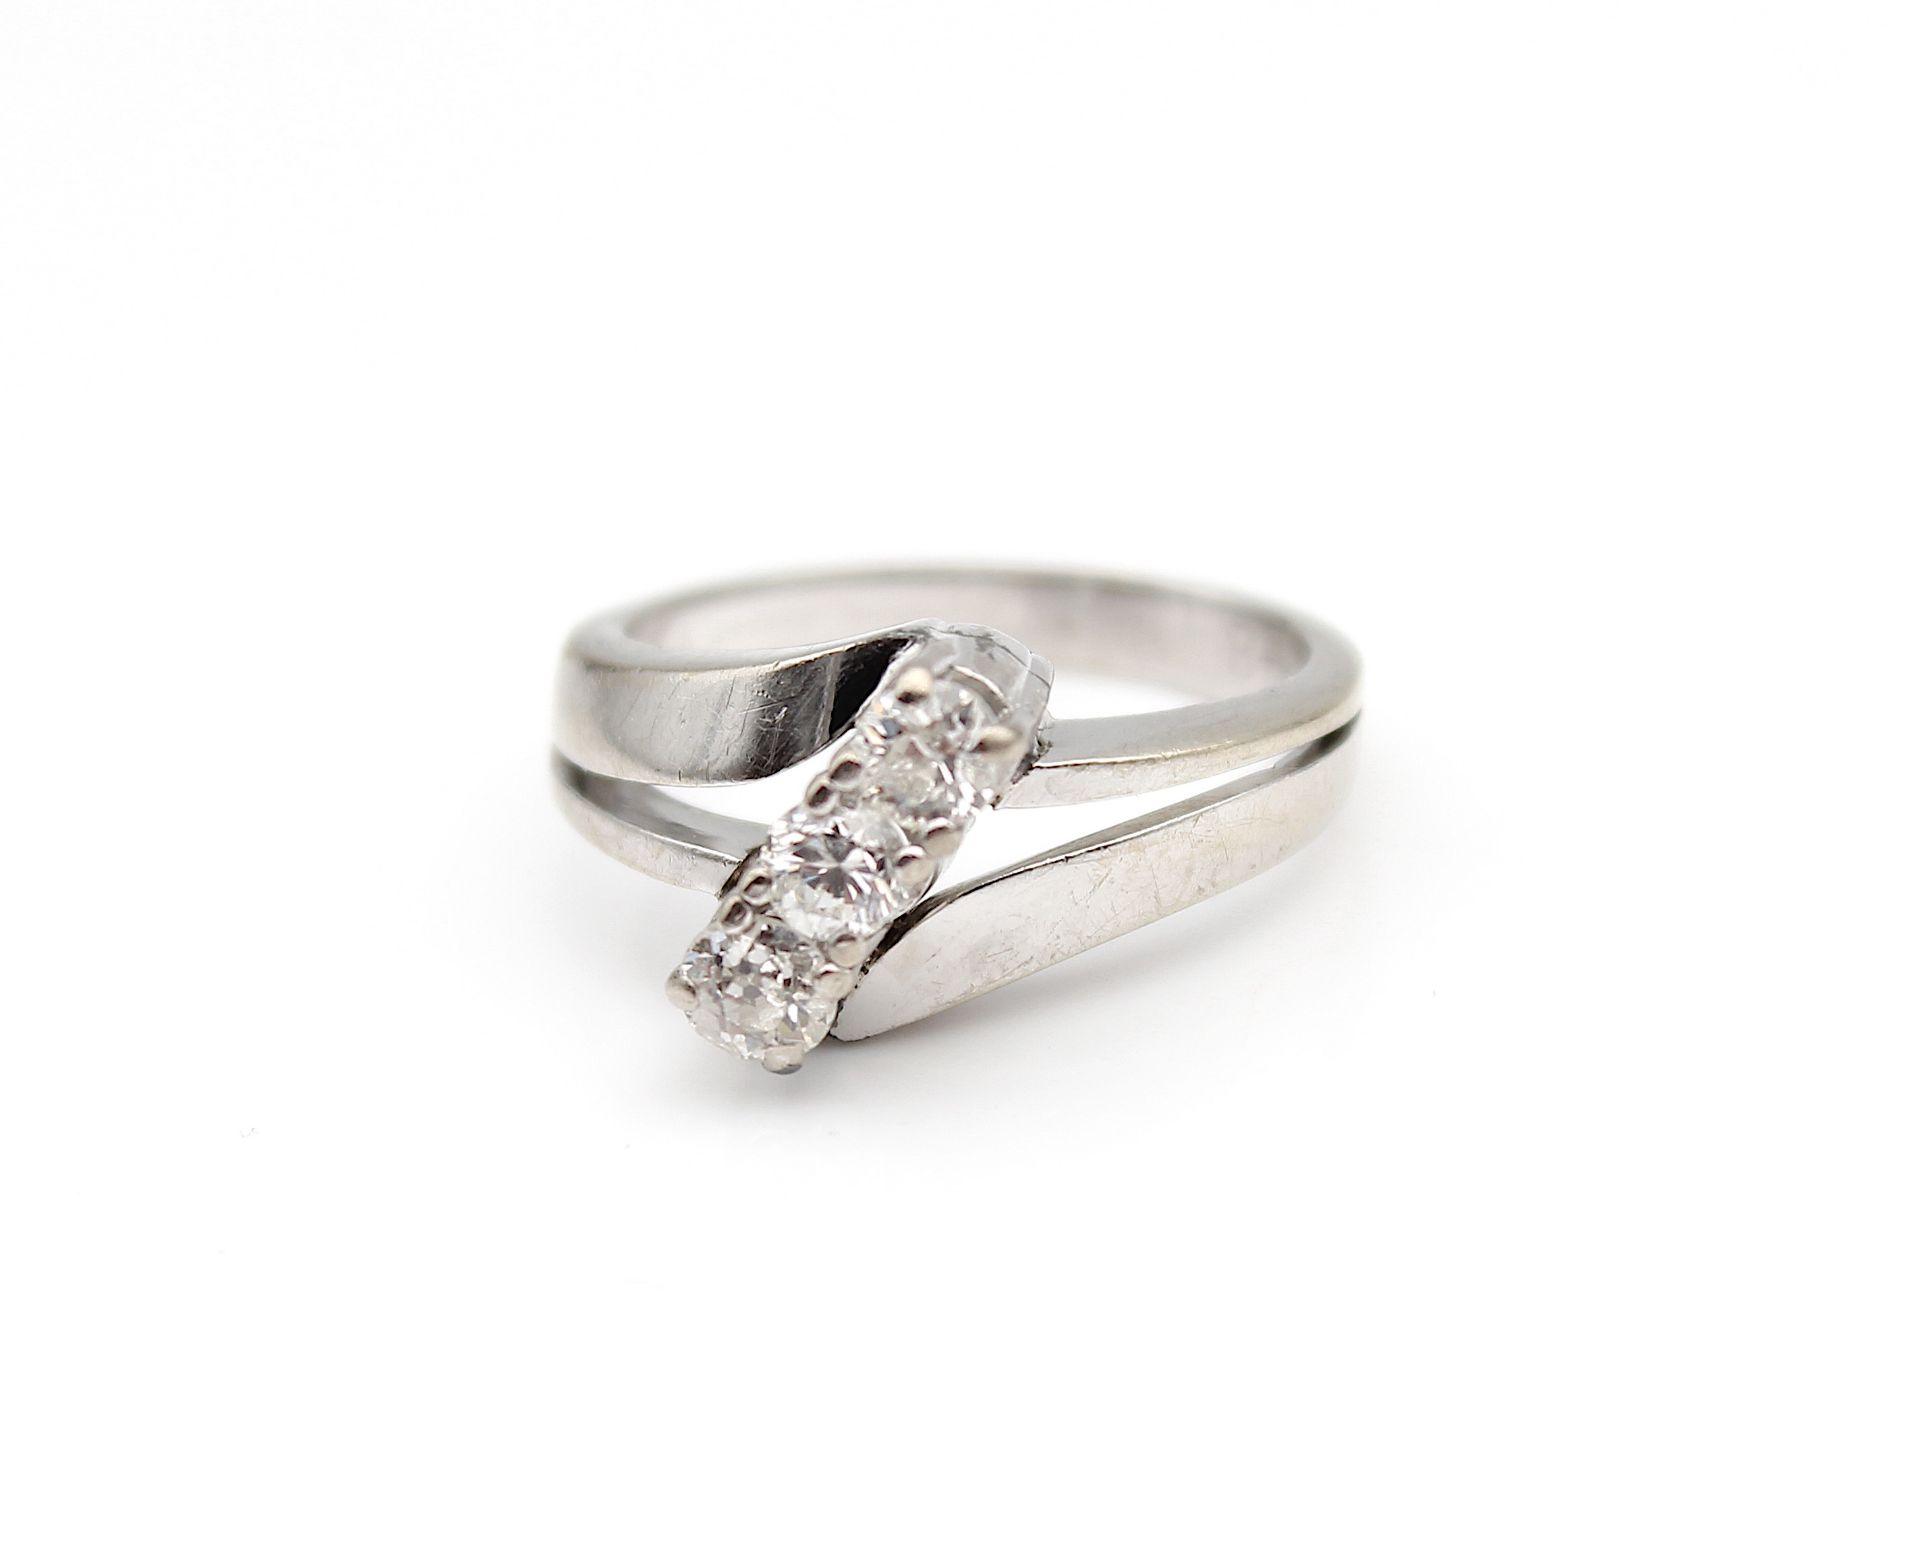 Classic vintage ring with diamonds - Image 2 of 4